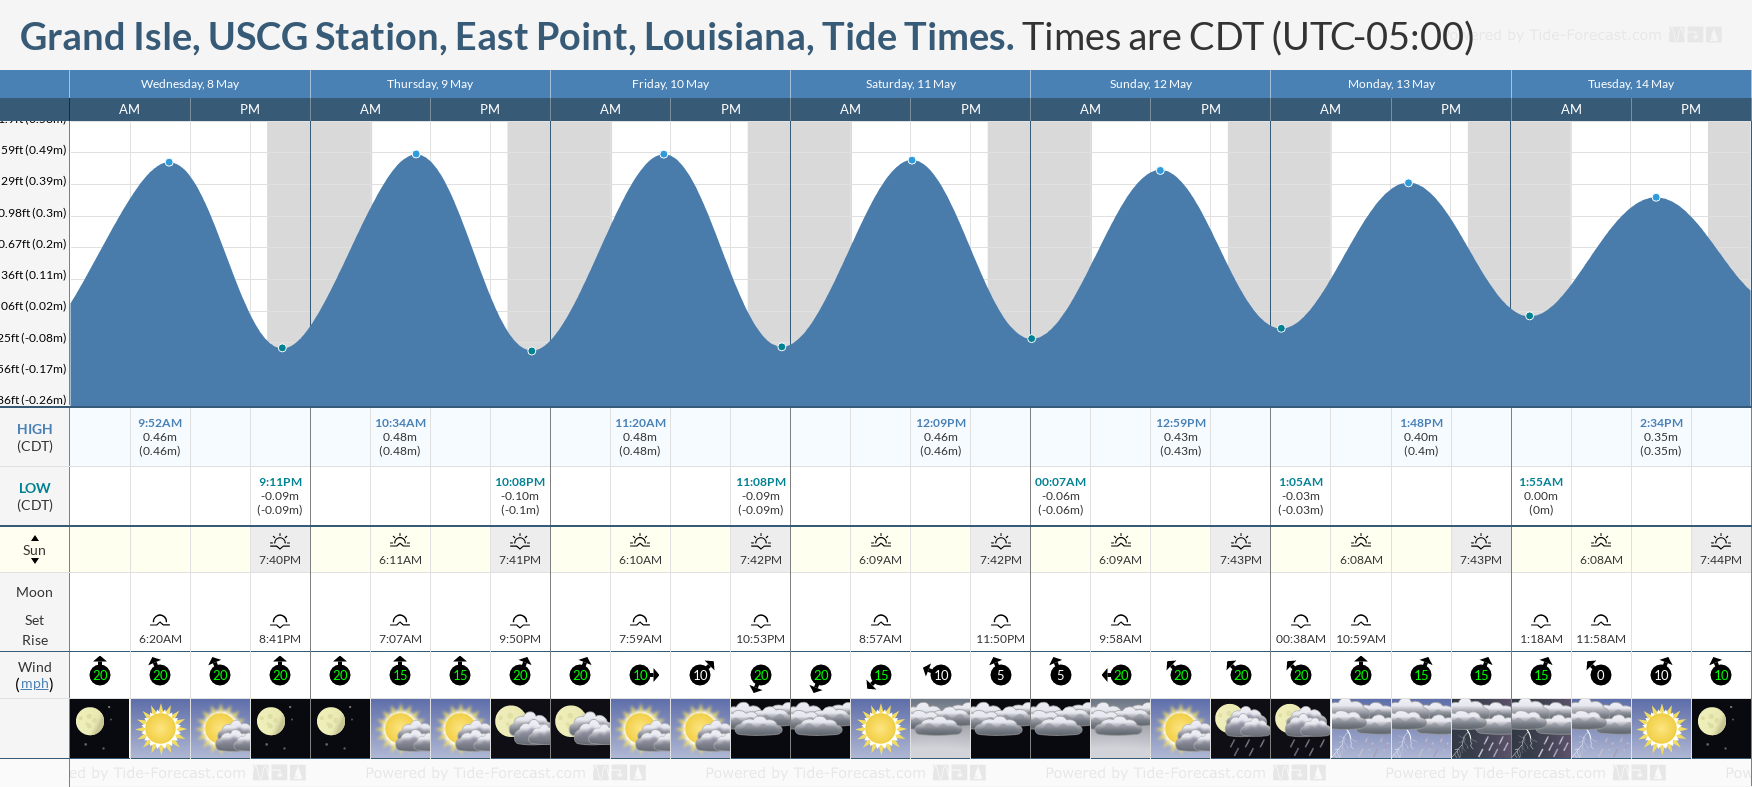 Grand Isle, USCG Station, East Point, Louisiana Tide Chart including high and low tide tide times for the next 7 days